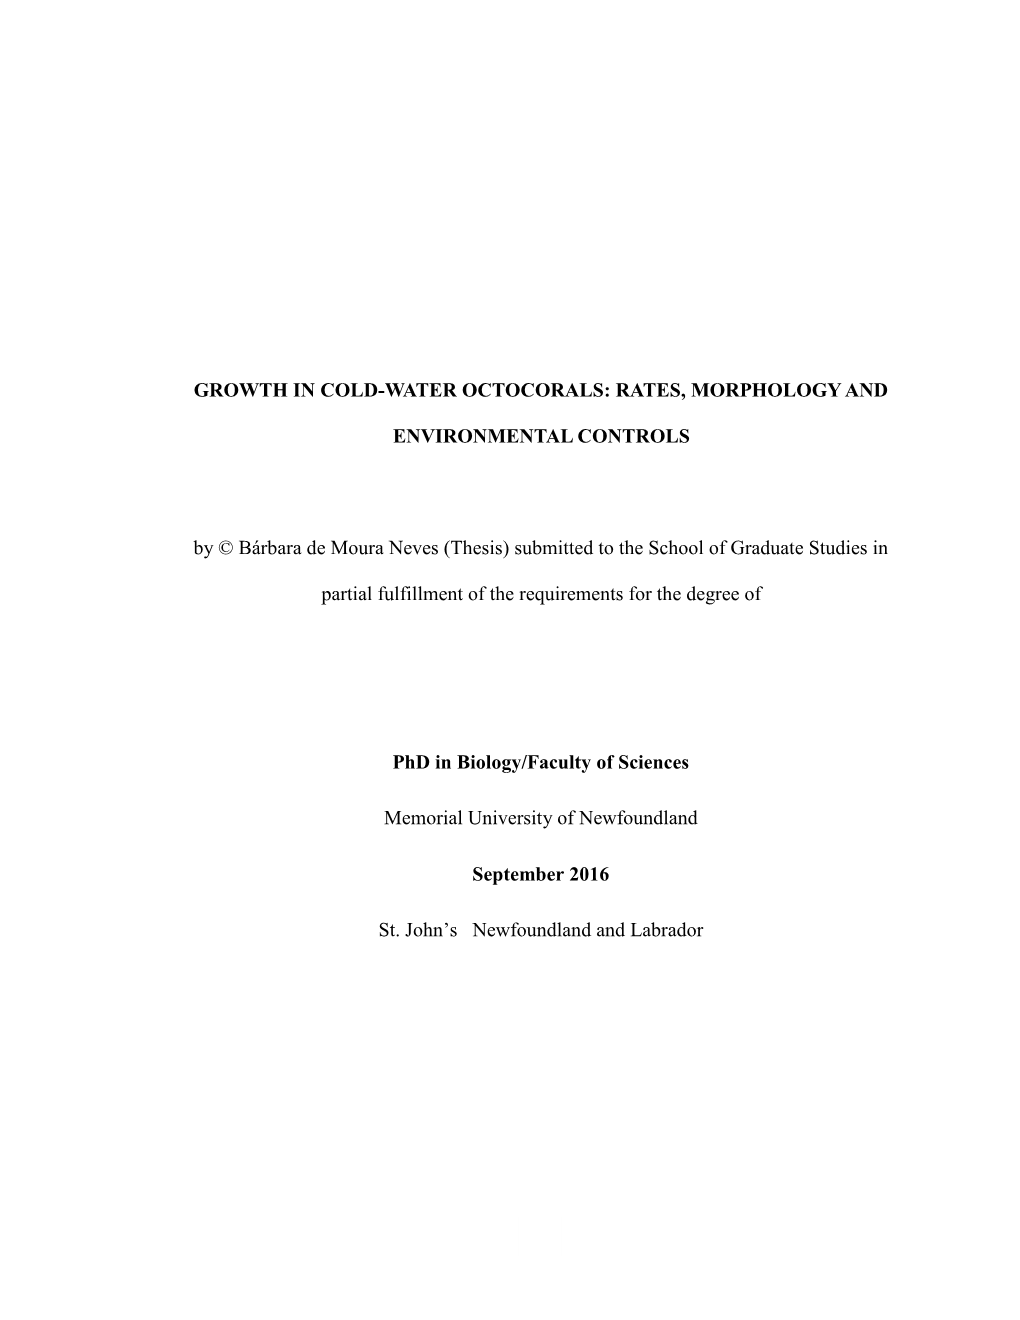 Thesis) Submitted to the School of Graduate Studies In